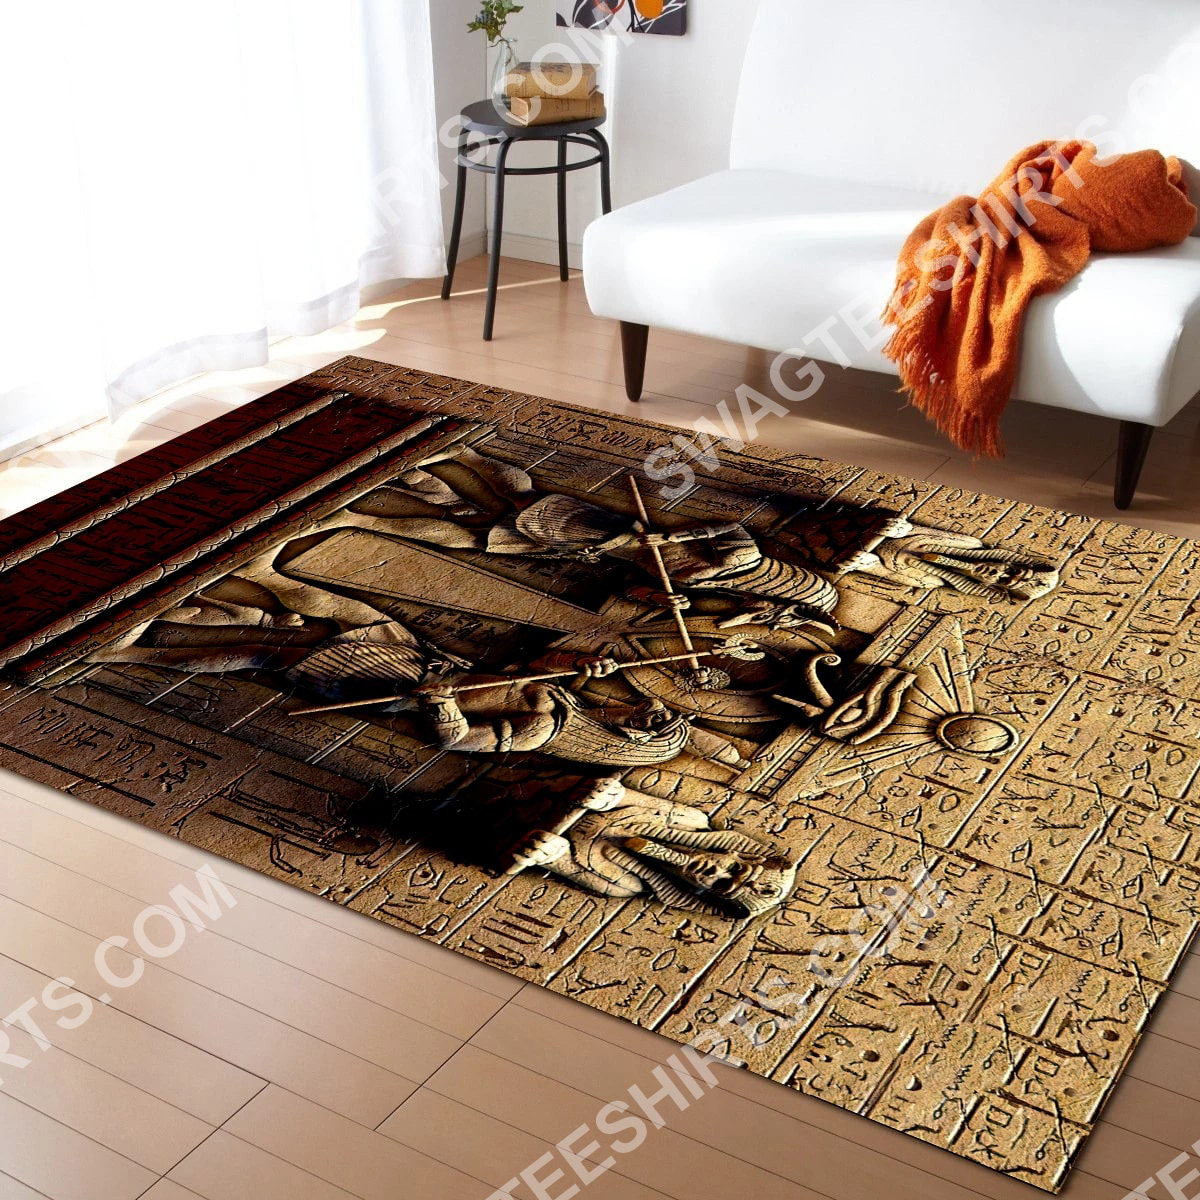 anubis egyptian civilization culture all over printed rug 5(1)